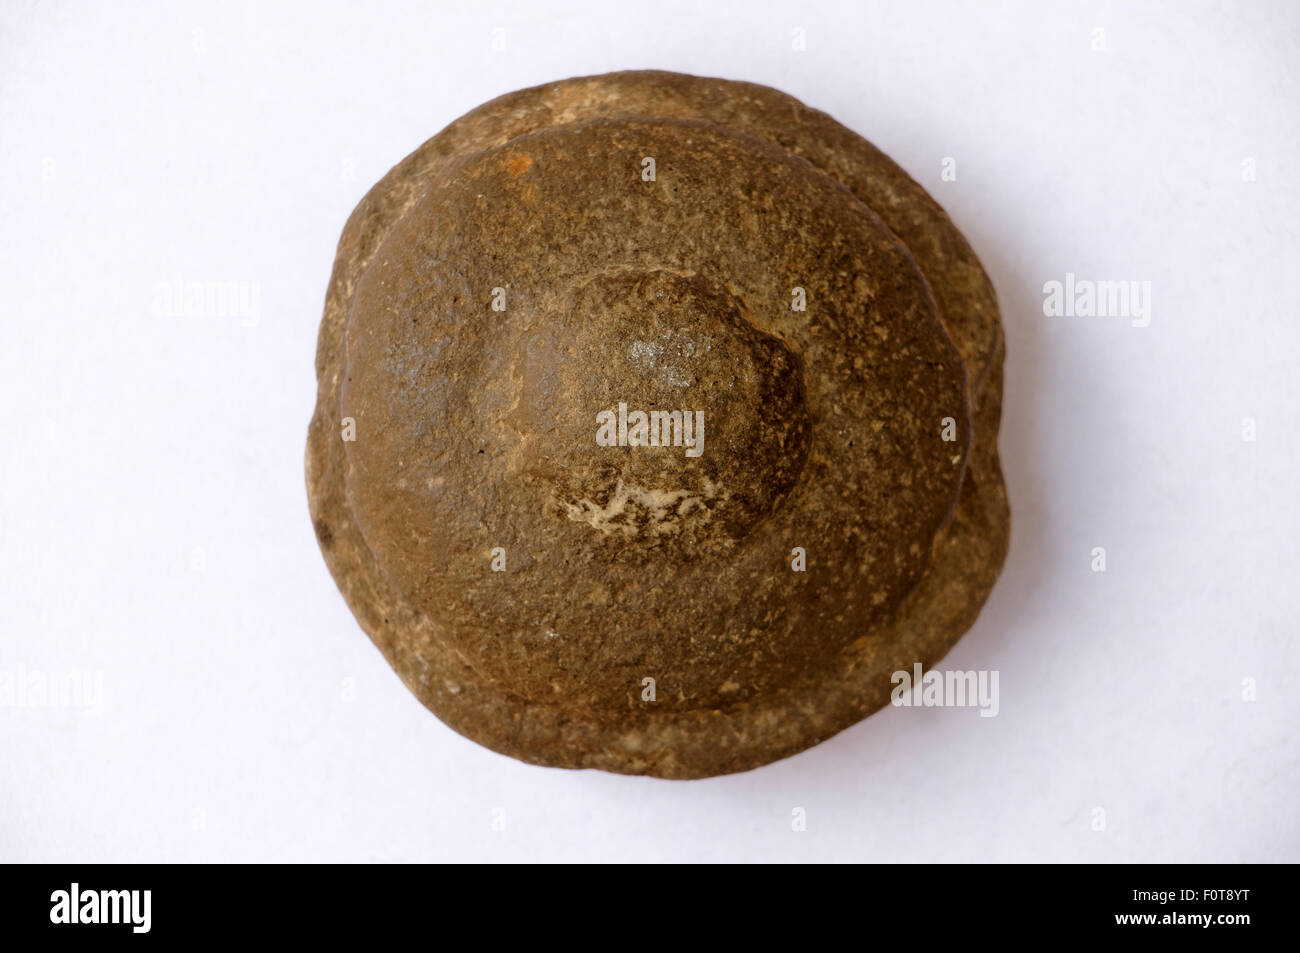 Top view of a small disc-shaped concretion from the province of Quebec, Canada Stock Photo